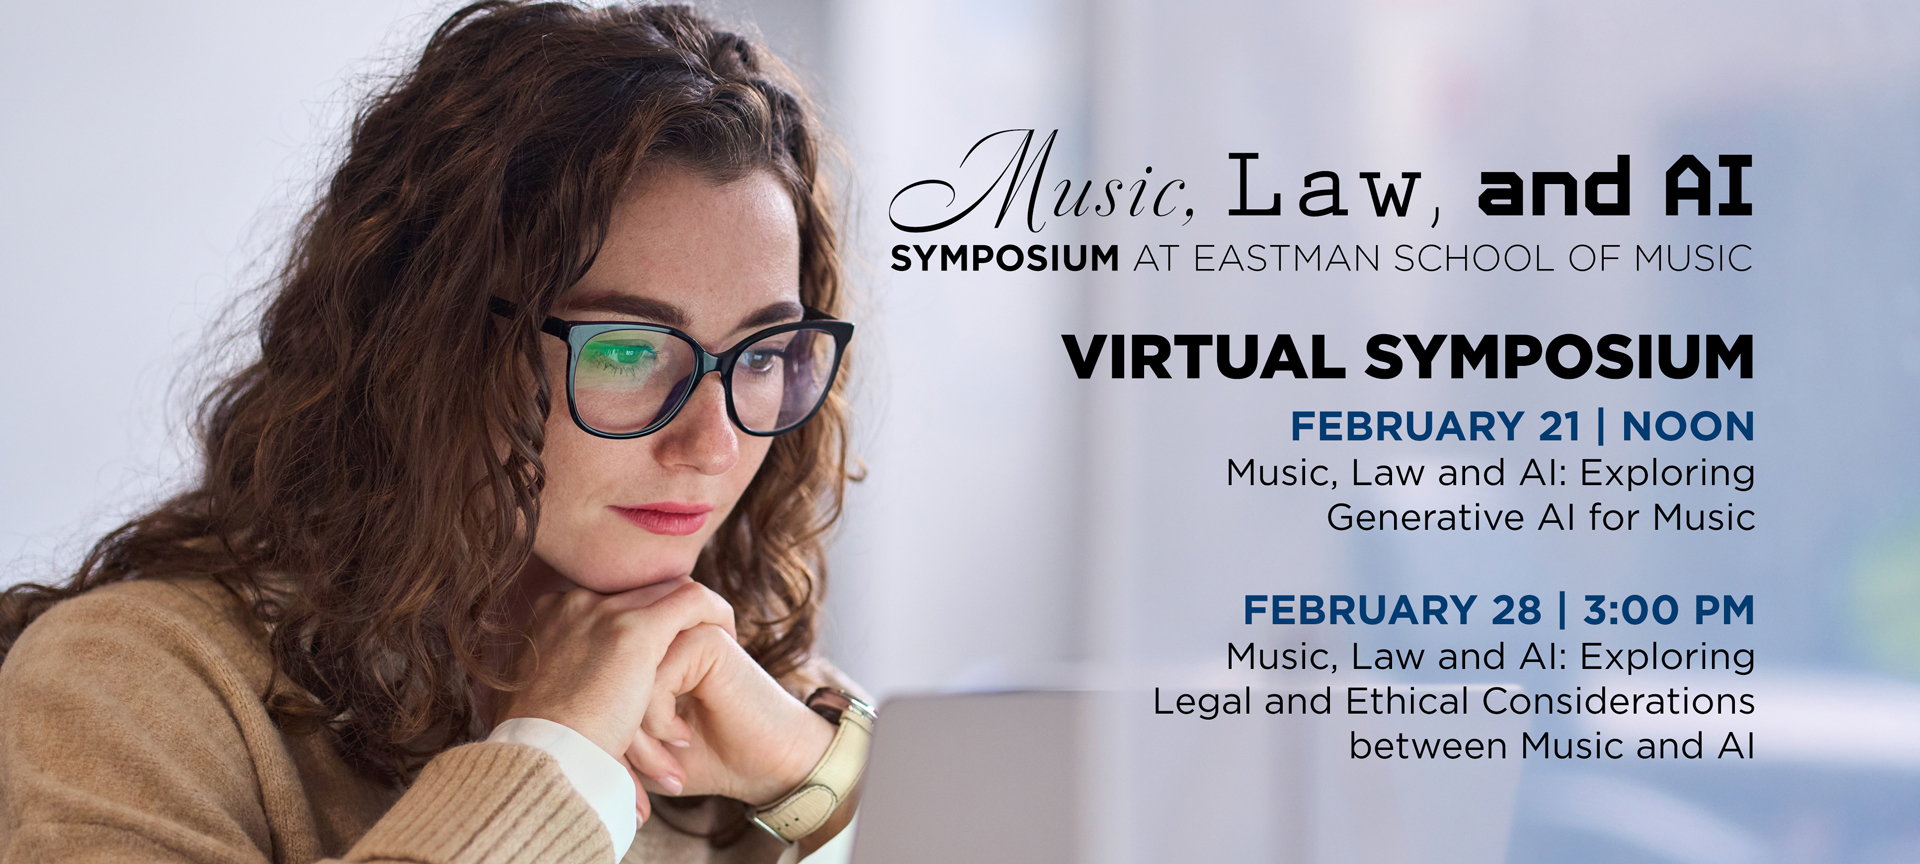 Music, Law, and AI Symposium